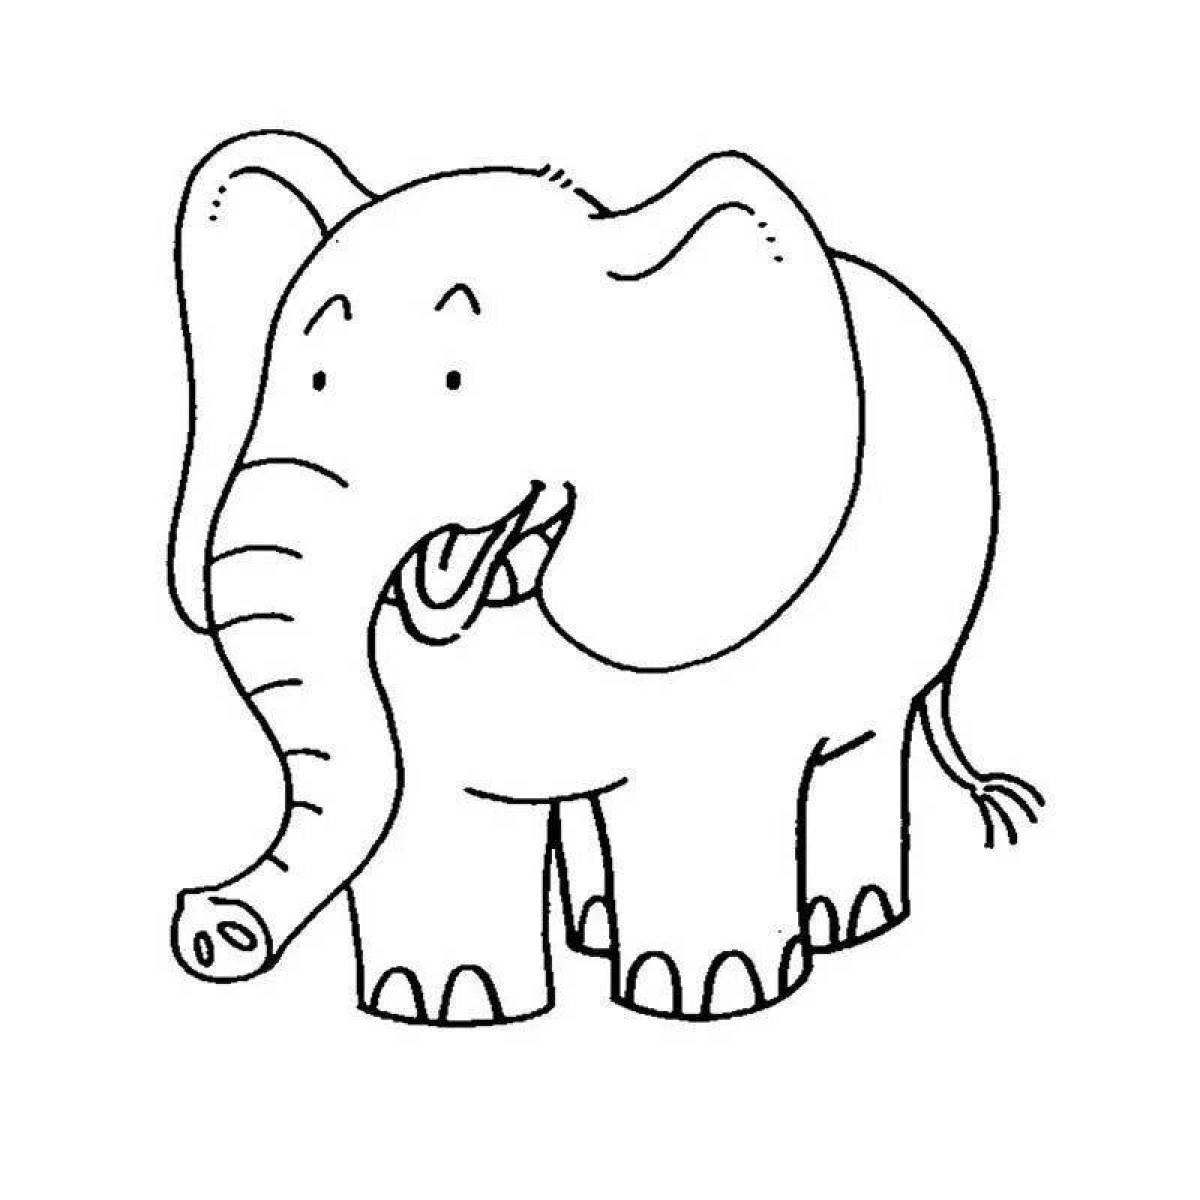 Funny elephant coloring for kids